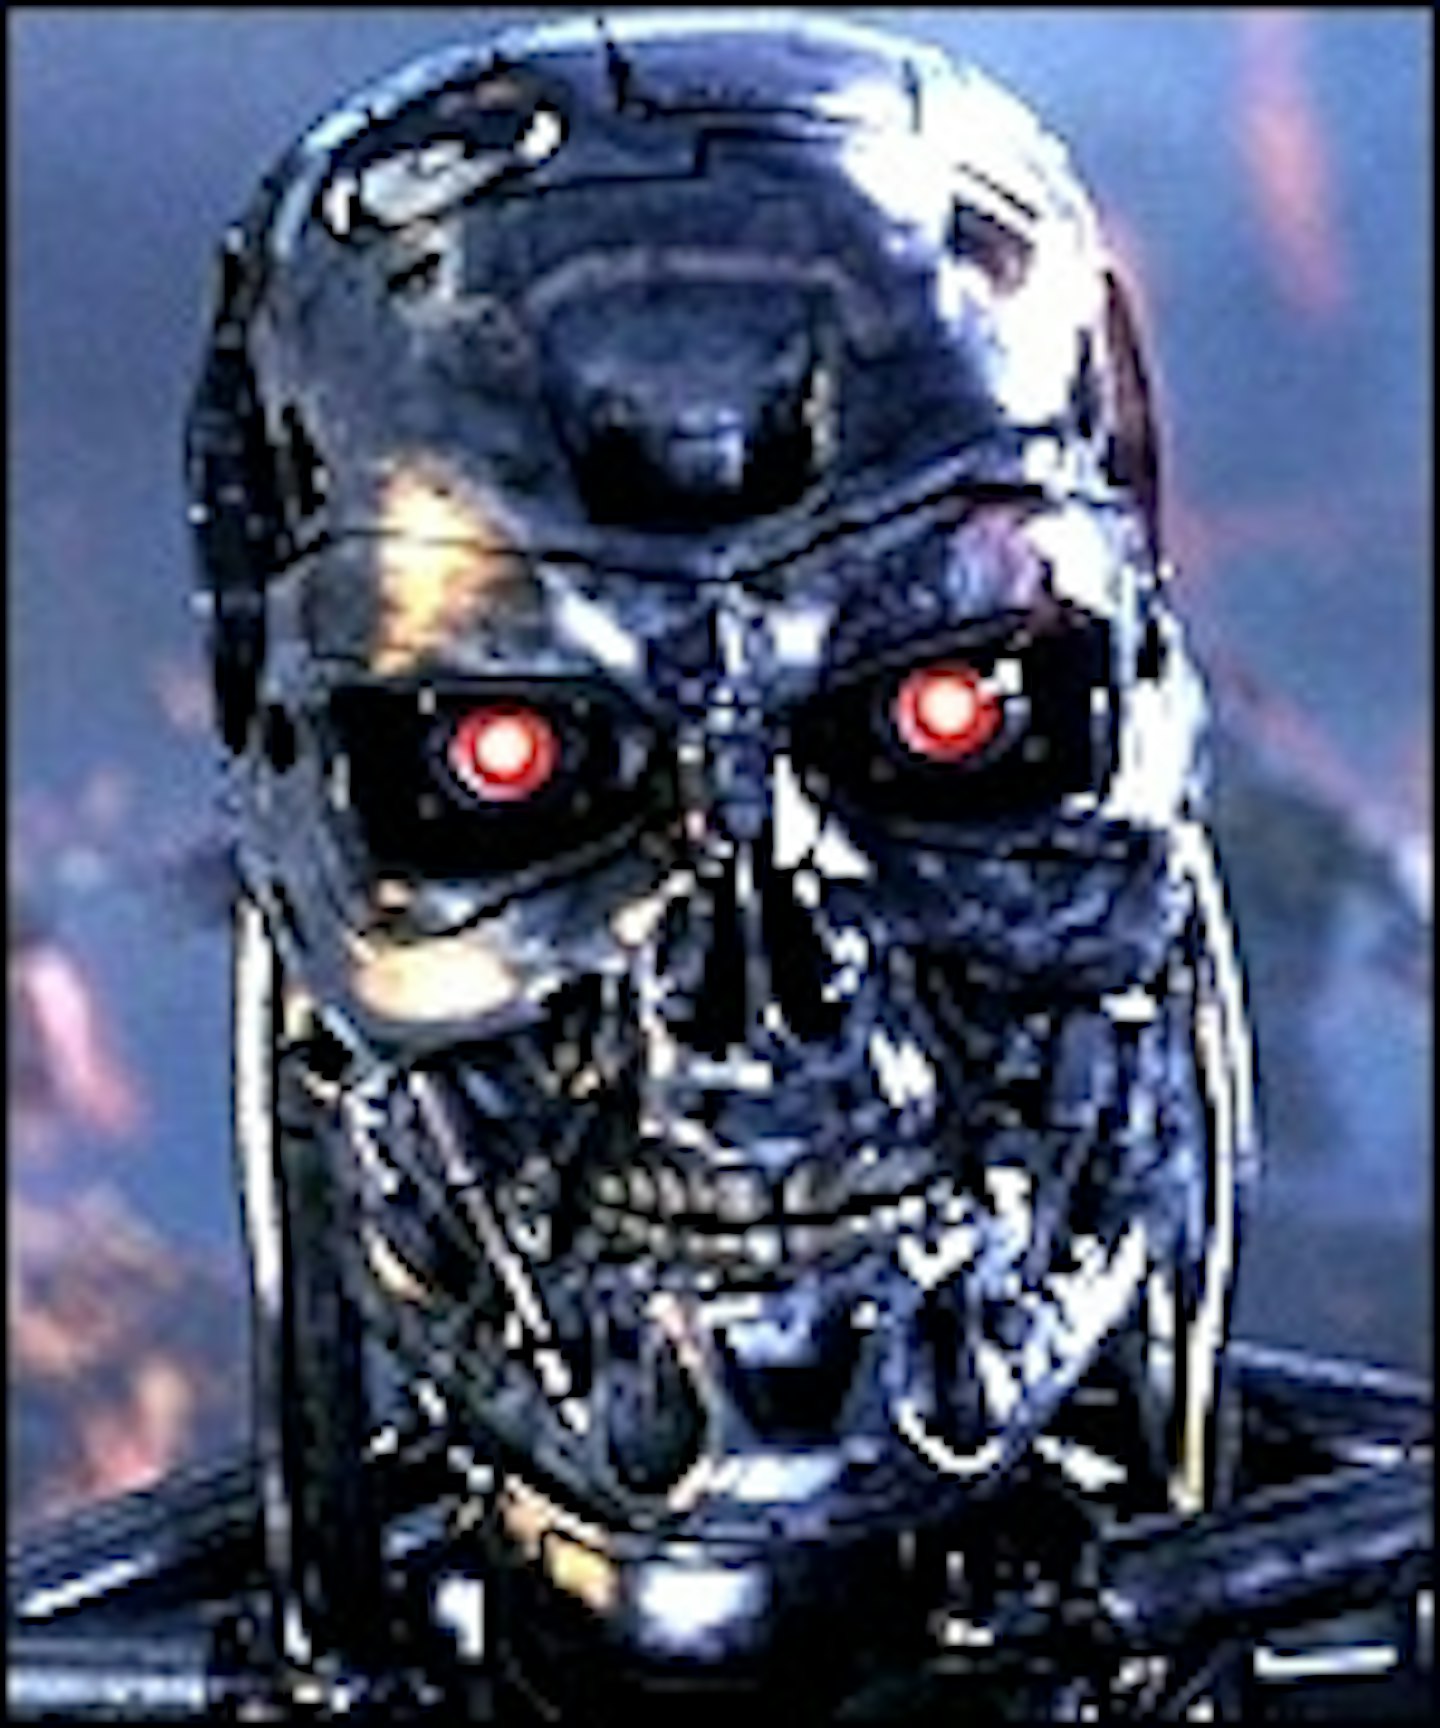 Terminator 4 Story Details Released